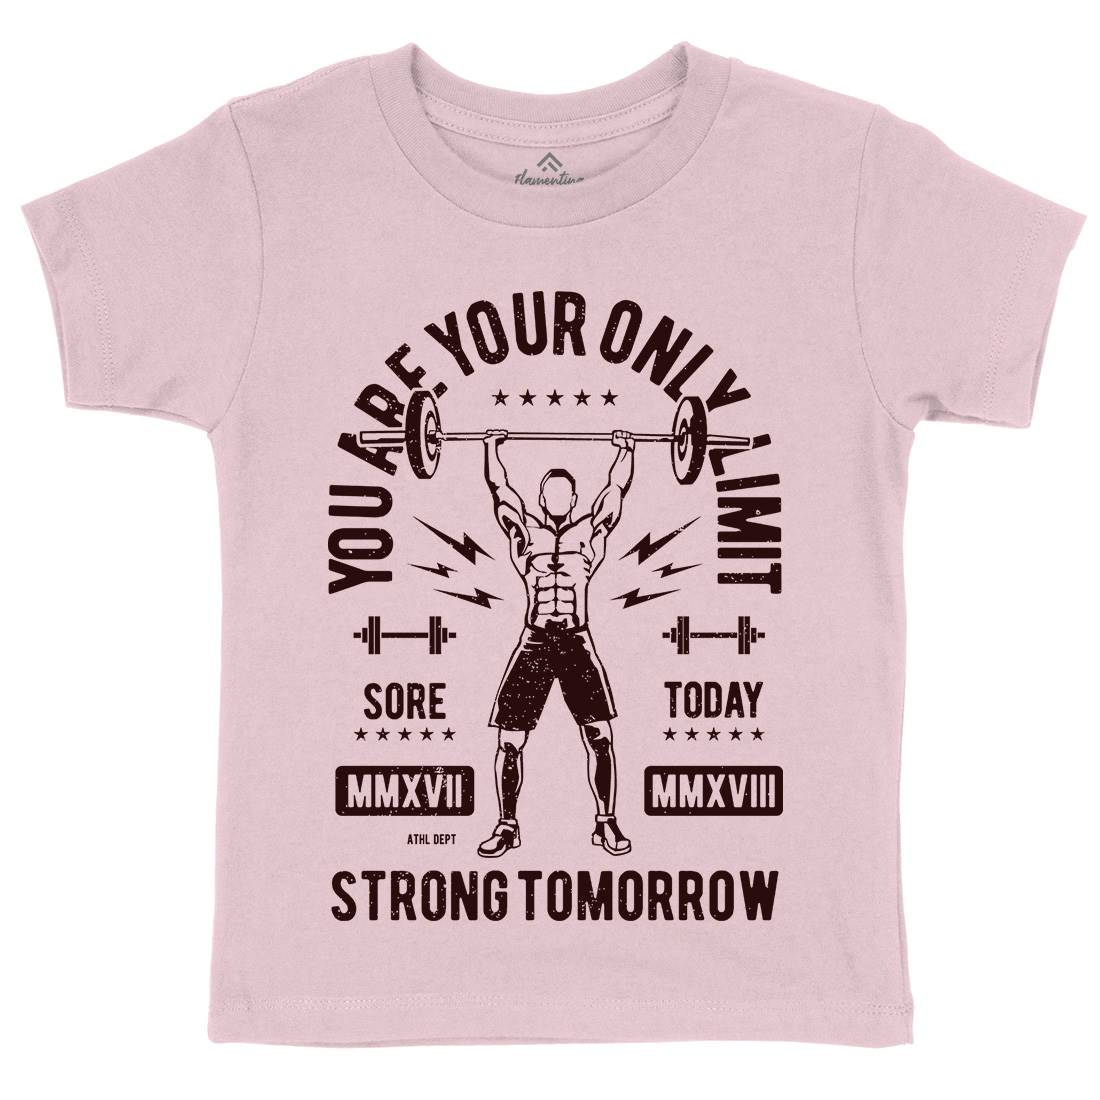 You Are Your Only Limit Kids Crew Neck T-Shirt Gym A799